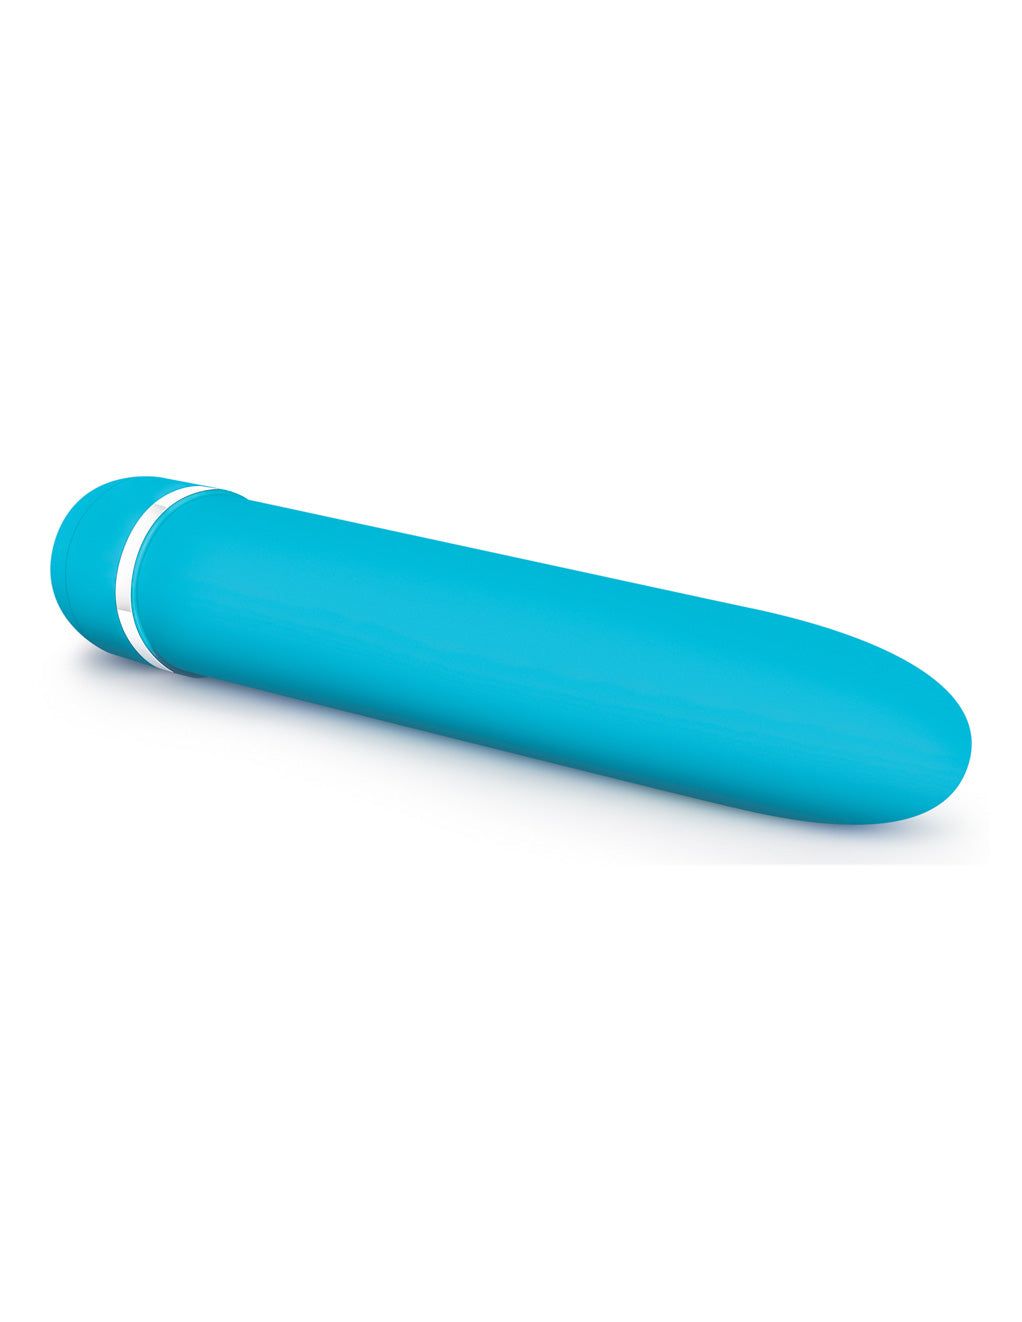 Rose Luxuriate Vibrator- Blue- Laying down